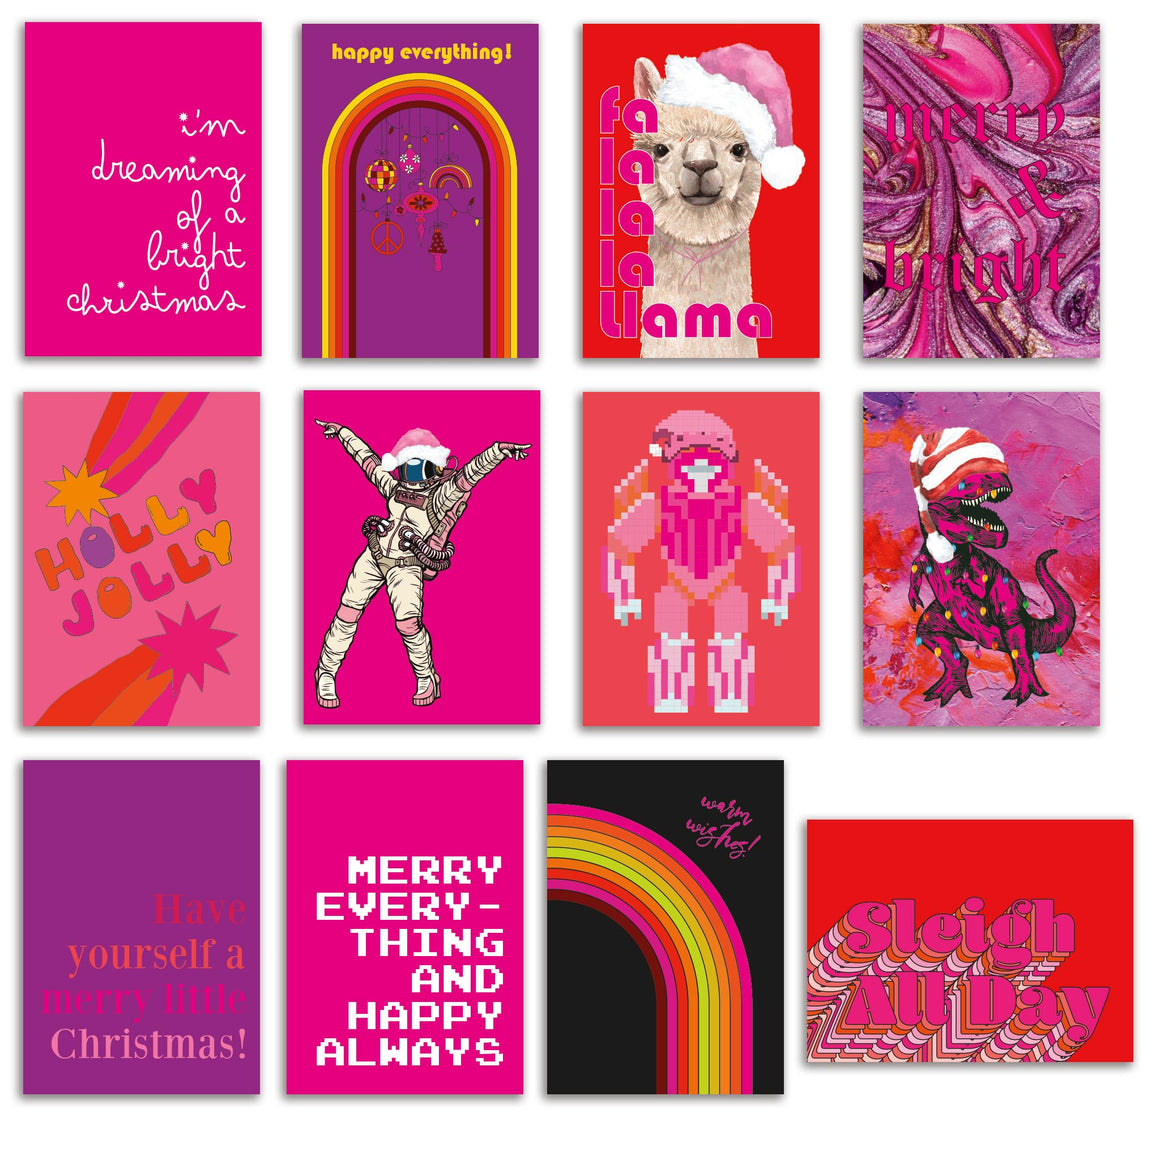 24 Hot Pink Christmas Cards in 12 Fun Designs + Envelopes